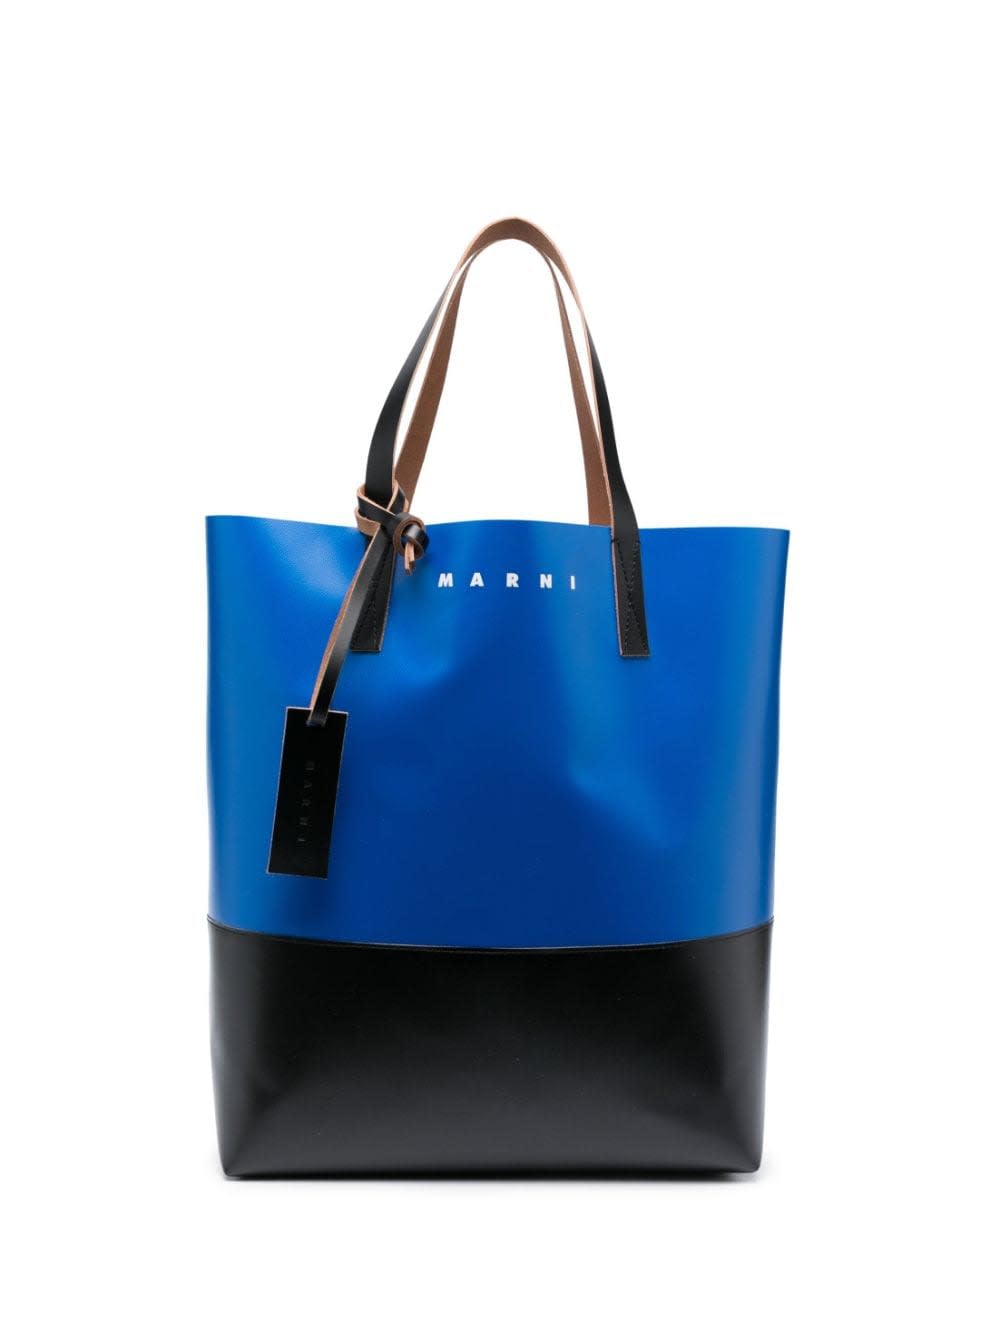 Marni North South Open Tote Bag In Color-Blocked With Printed Logo